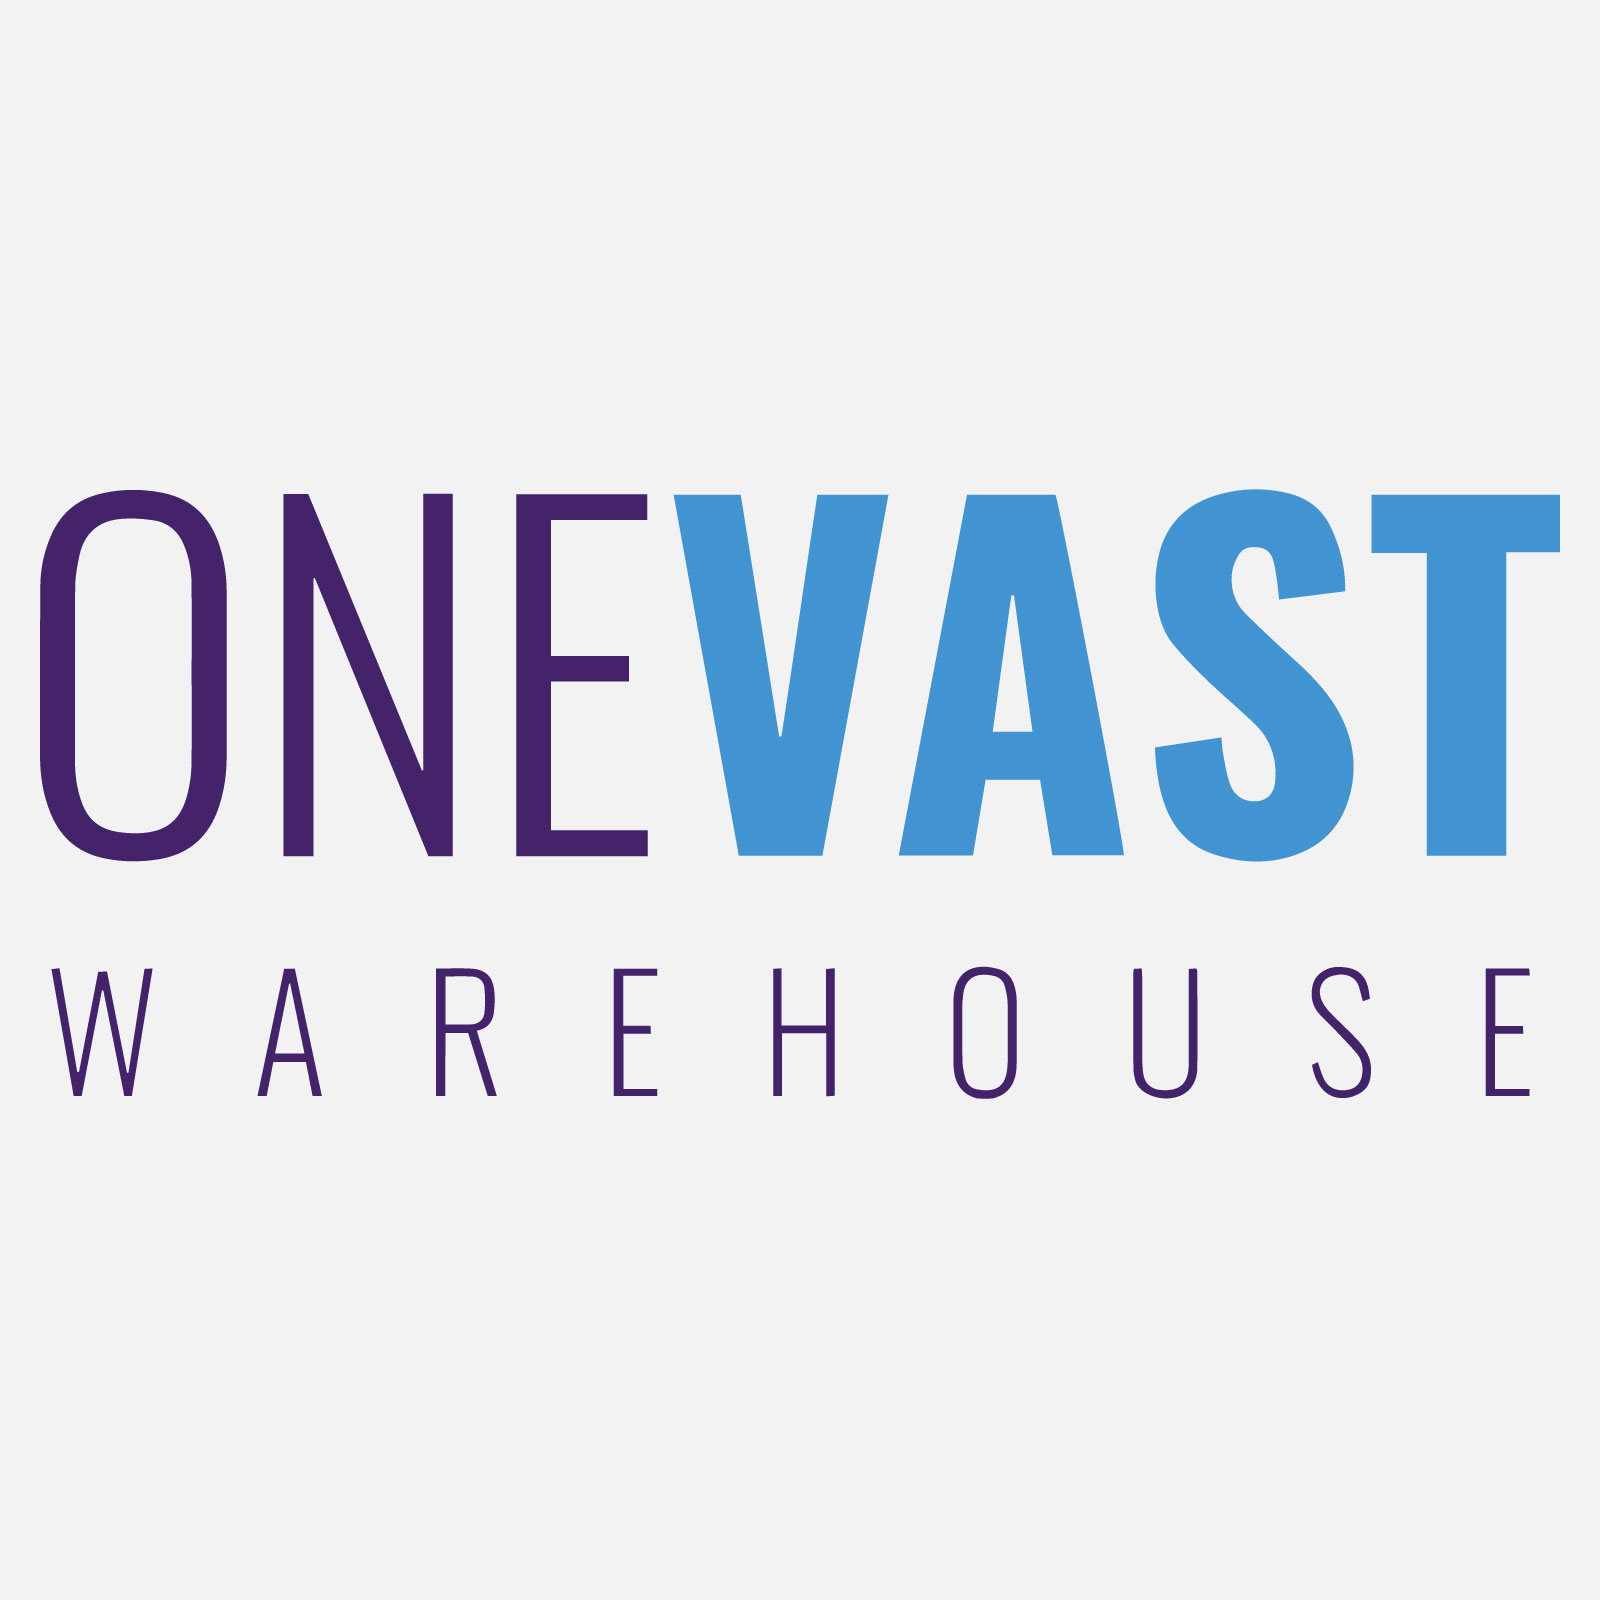 Online warehouse space